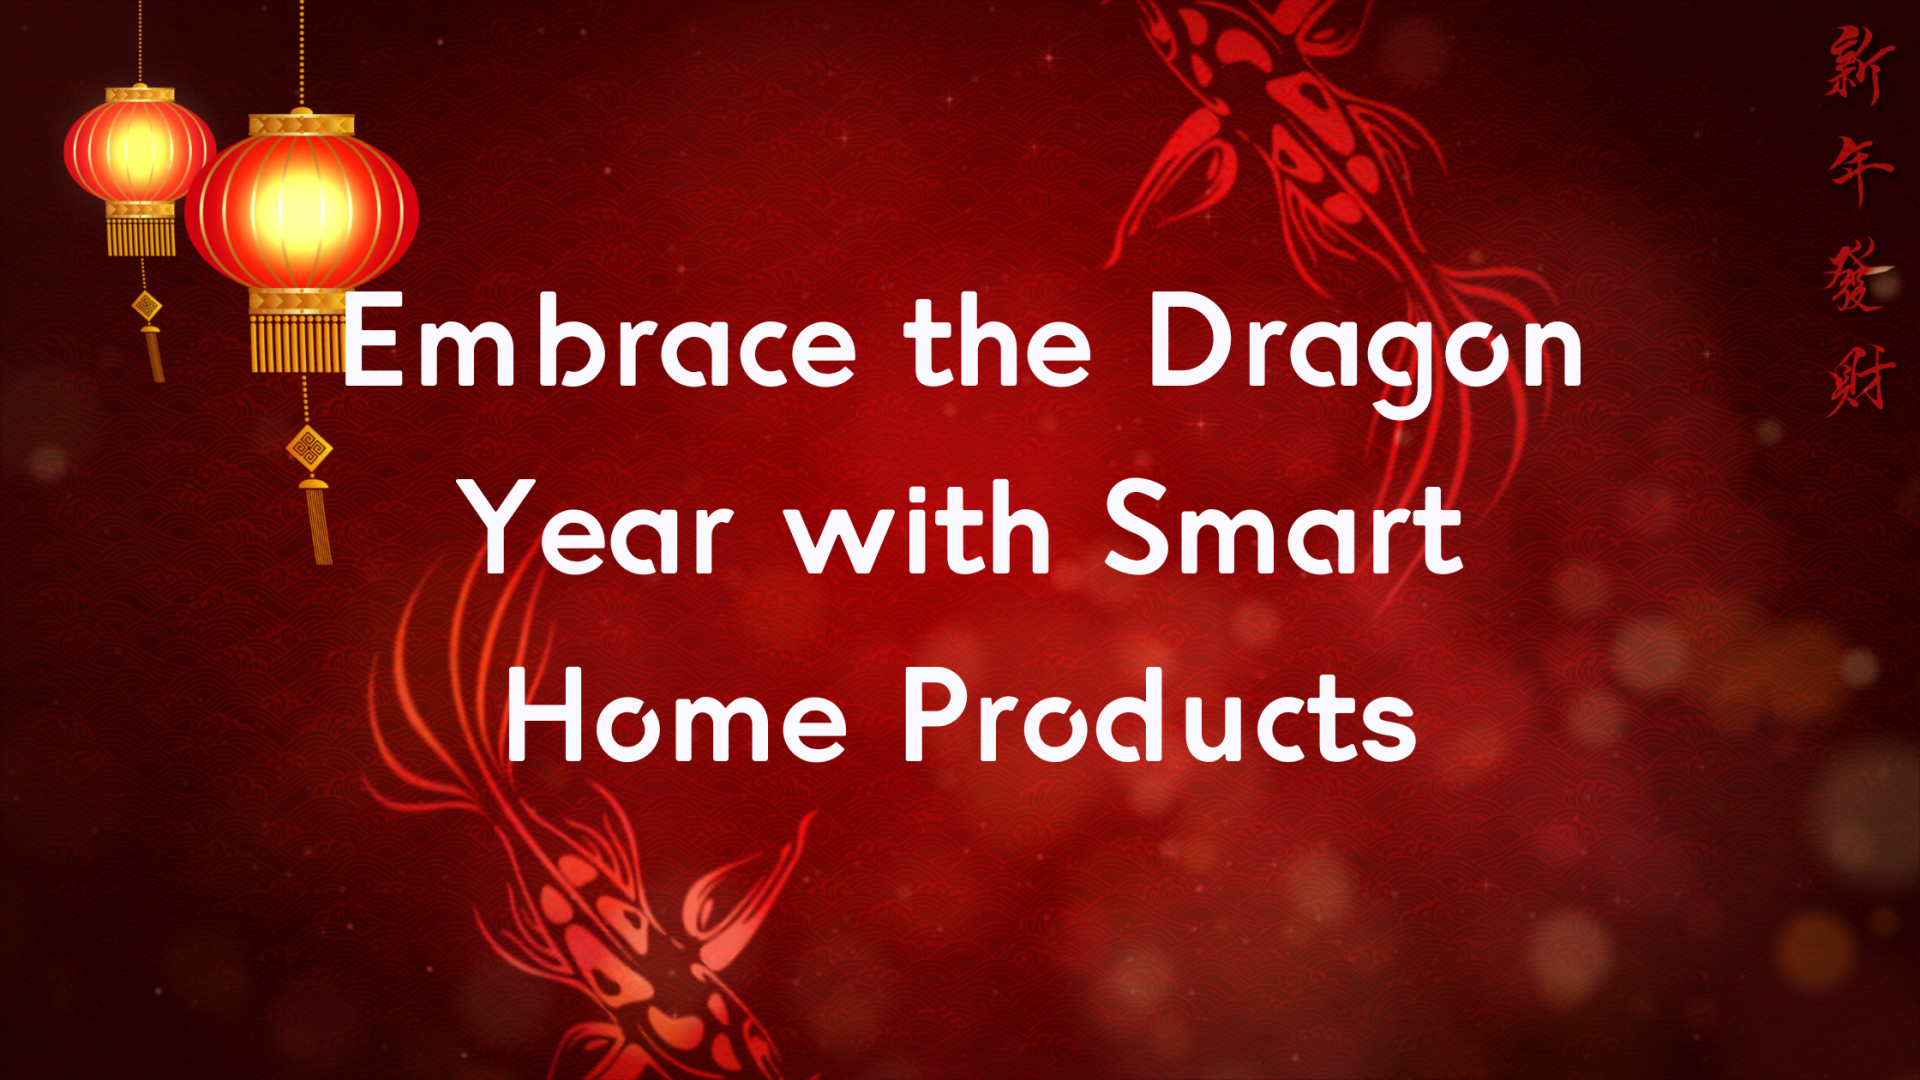 Embrace the Dragon Year with Smart Home Products